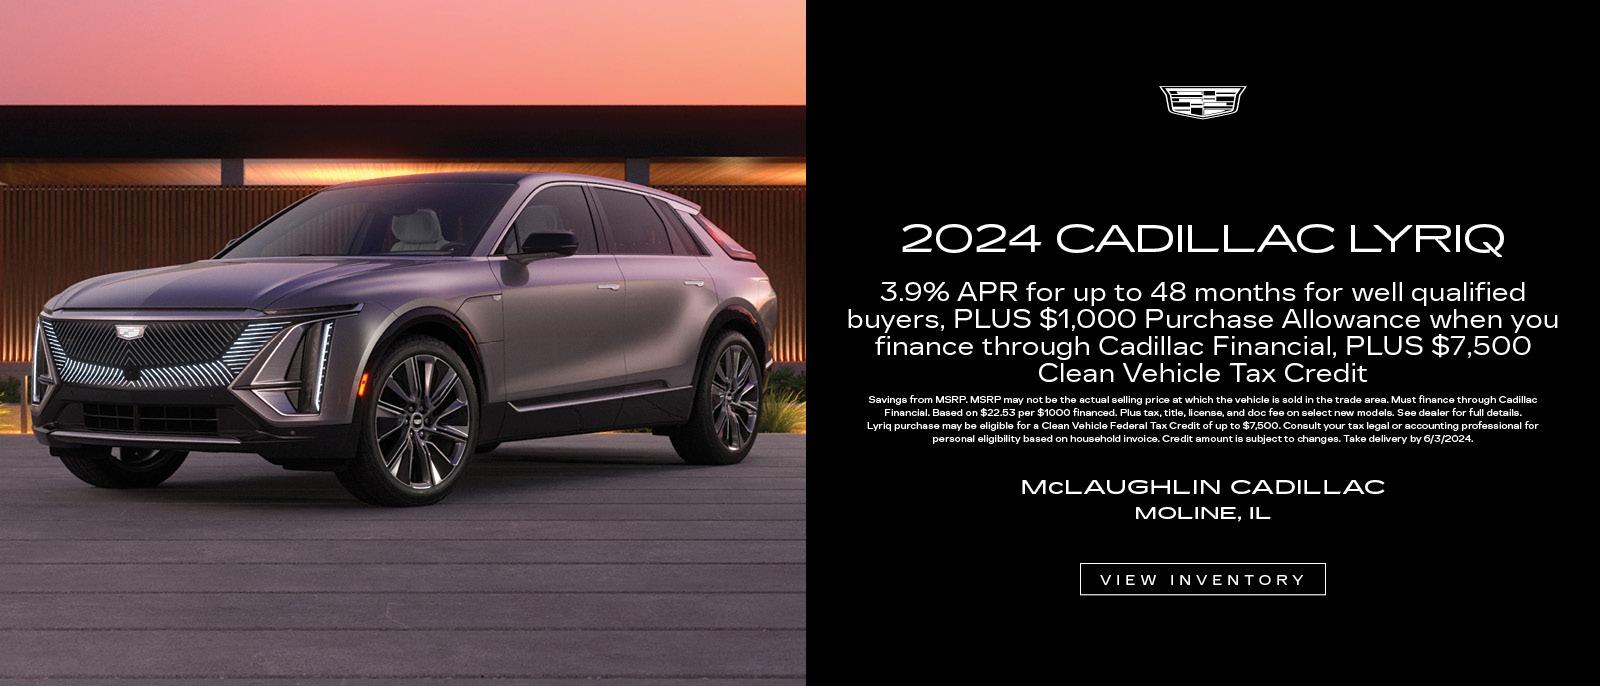 Get a new 2024 Cadillac Lyriq with 3.9% APR for up to 48 months for well qualified buyers, plus $1,000 Purchase Allowance when you finance through Cadillac Financial, plus $7,500 Clean Vehicle Tax Credit